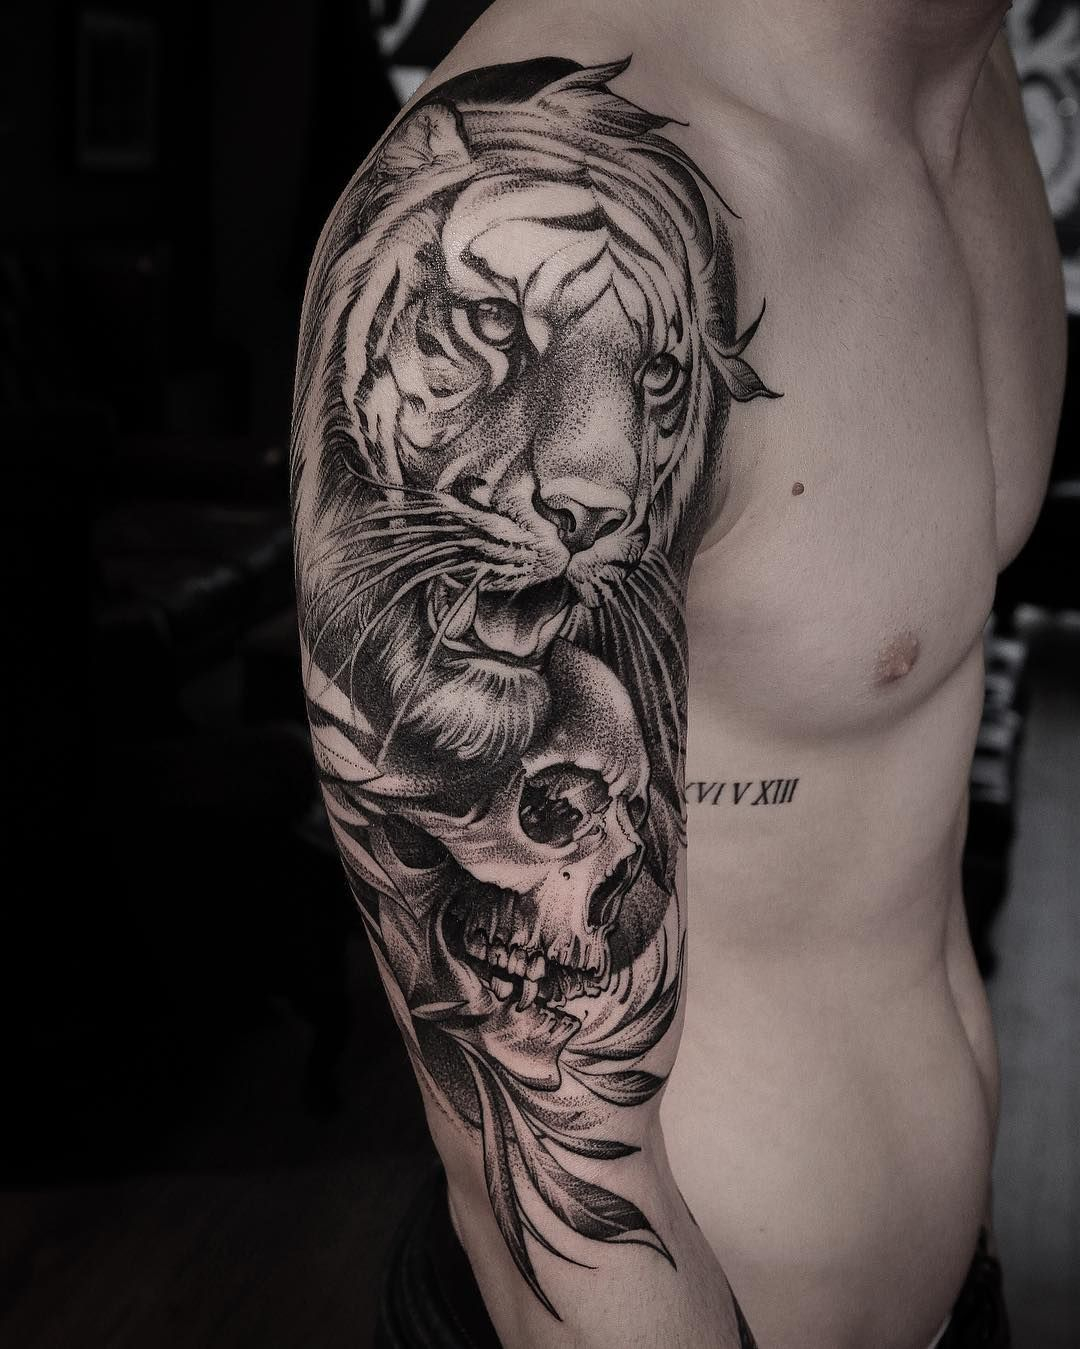 Tiger Tattoos Meaning And Design Ideas Tiger Tattoo Ideas intended for proportions 1080 X 1349